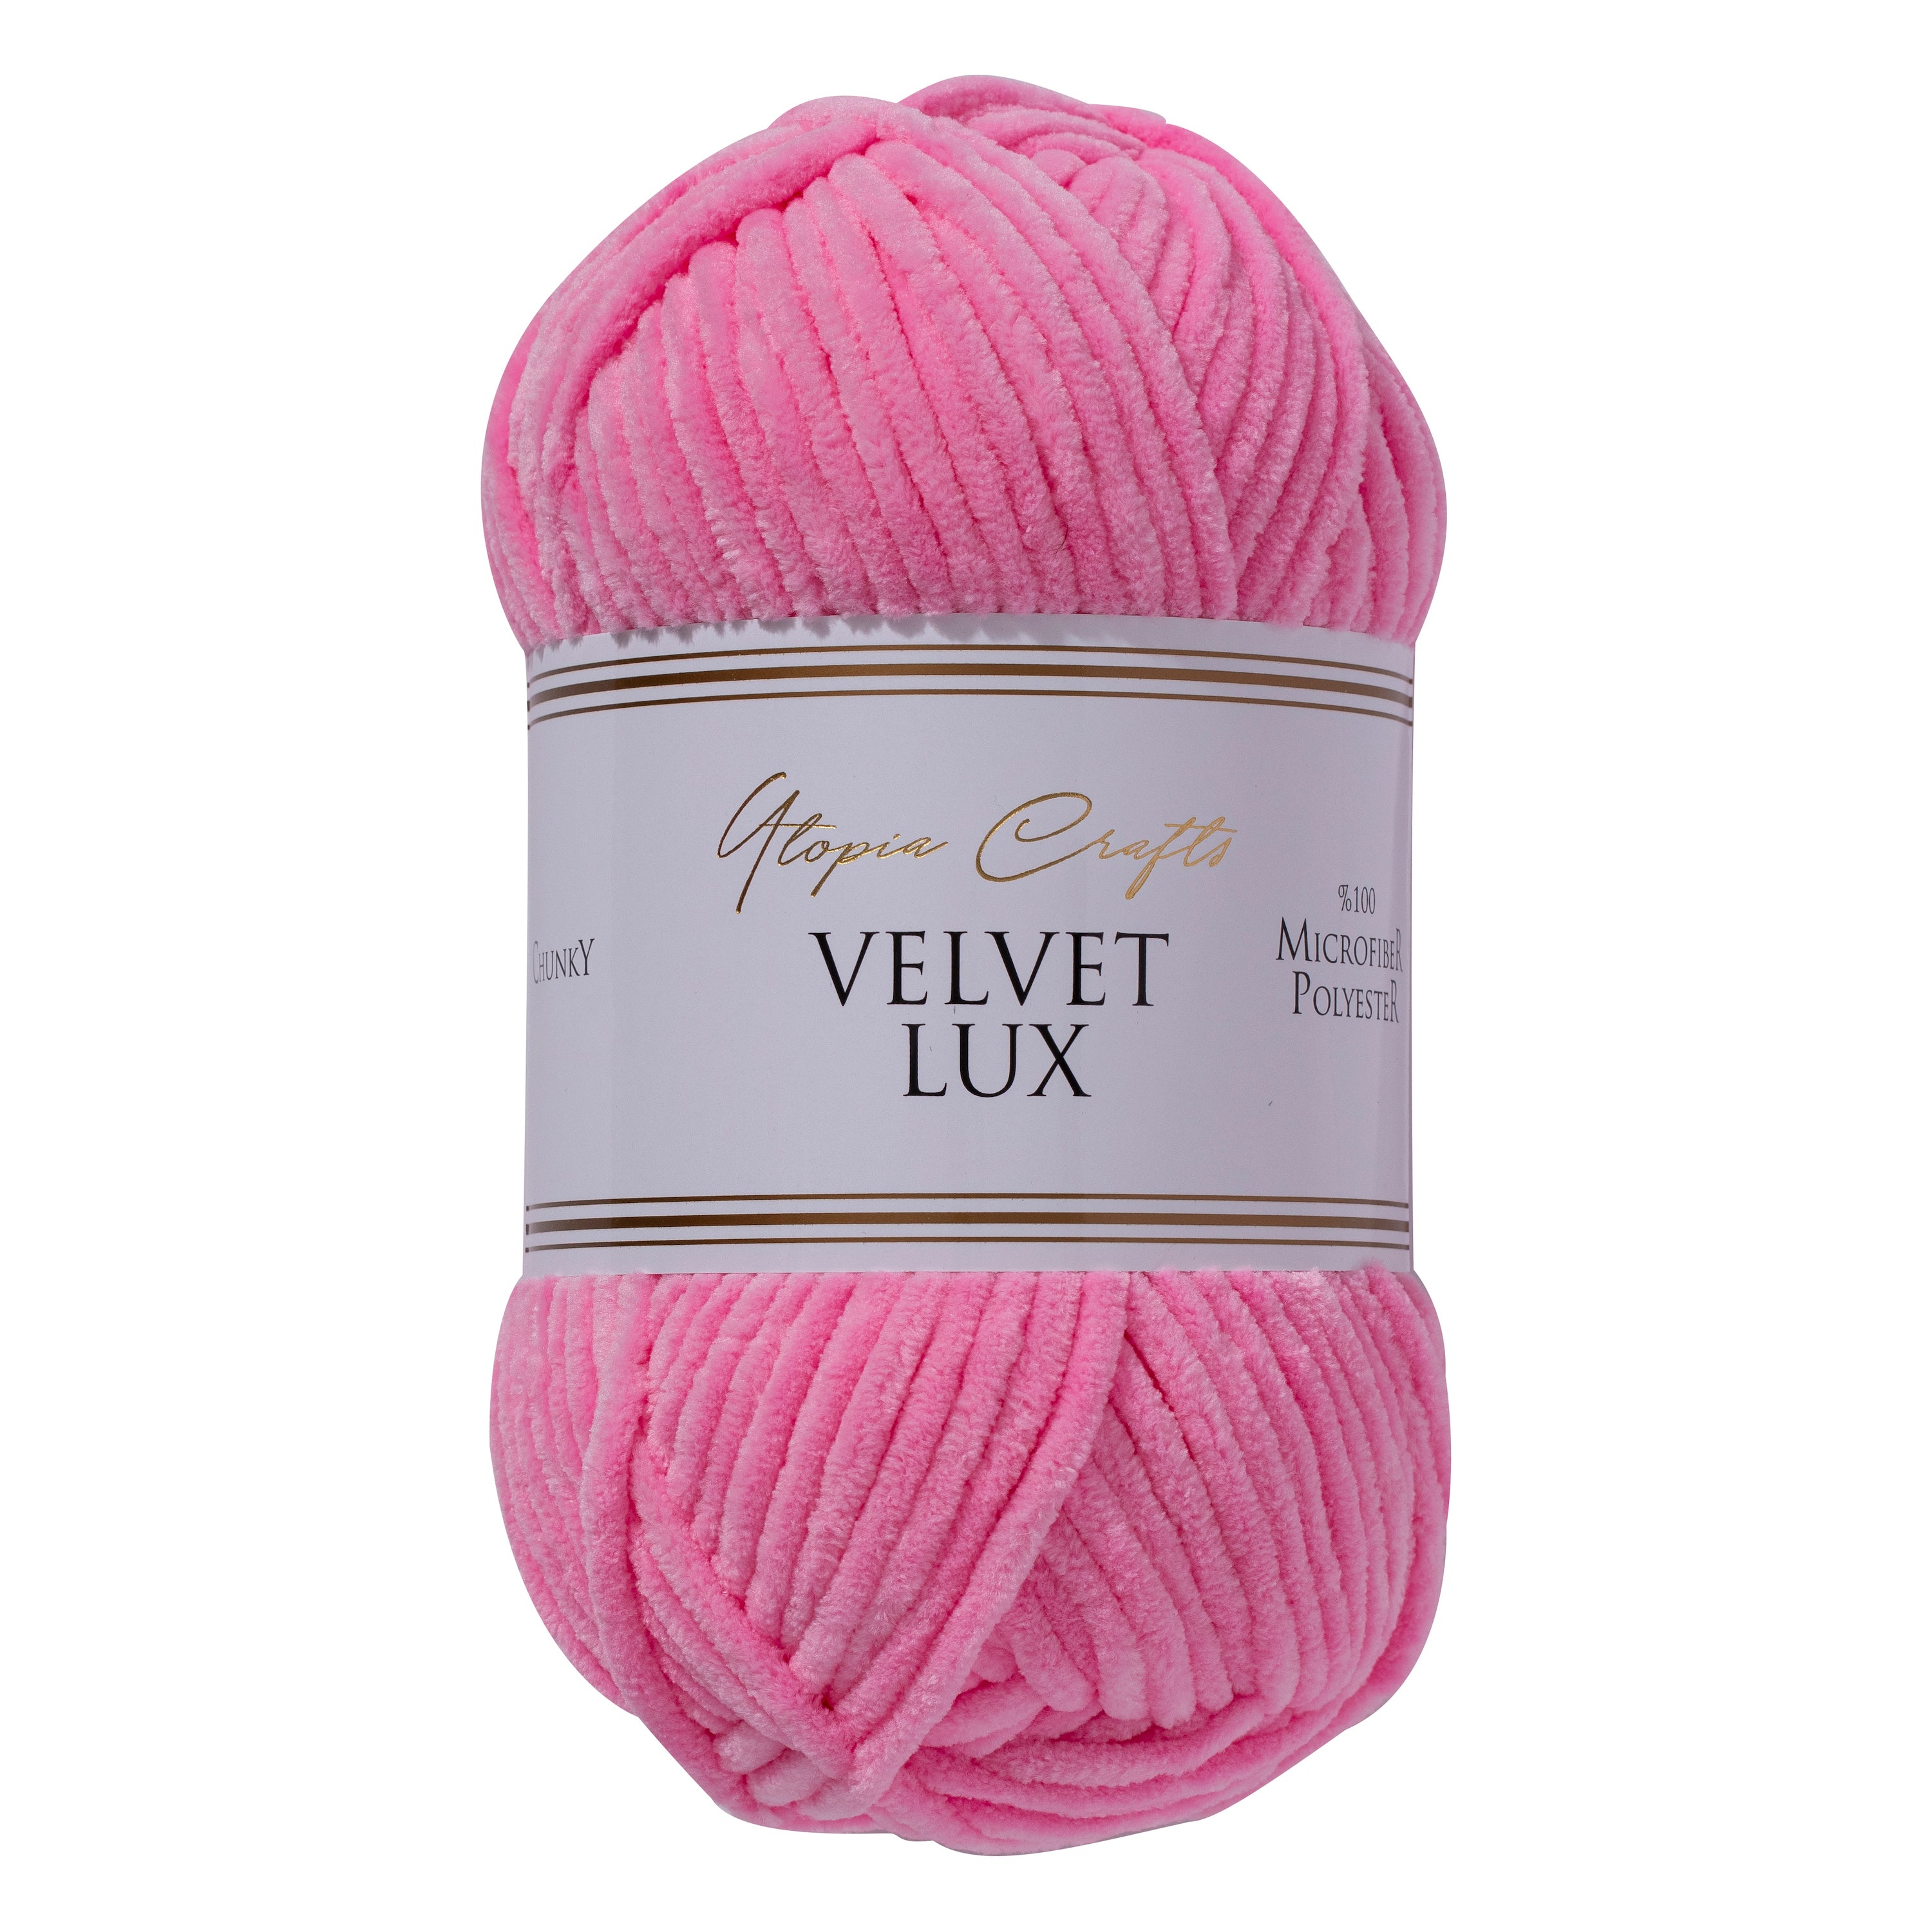 Utopia Crafts Velvet Lux Chenille Super Soft Chunky Yarn for Knitting and Crochet, 100g - 110m (Tulip Pink)